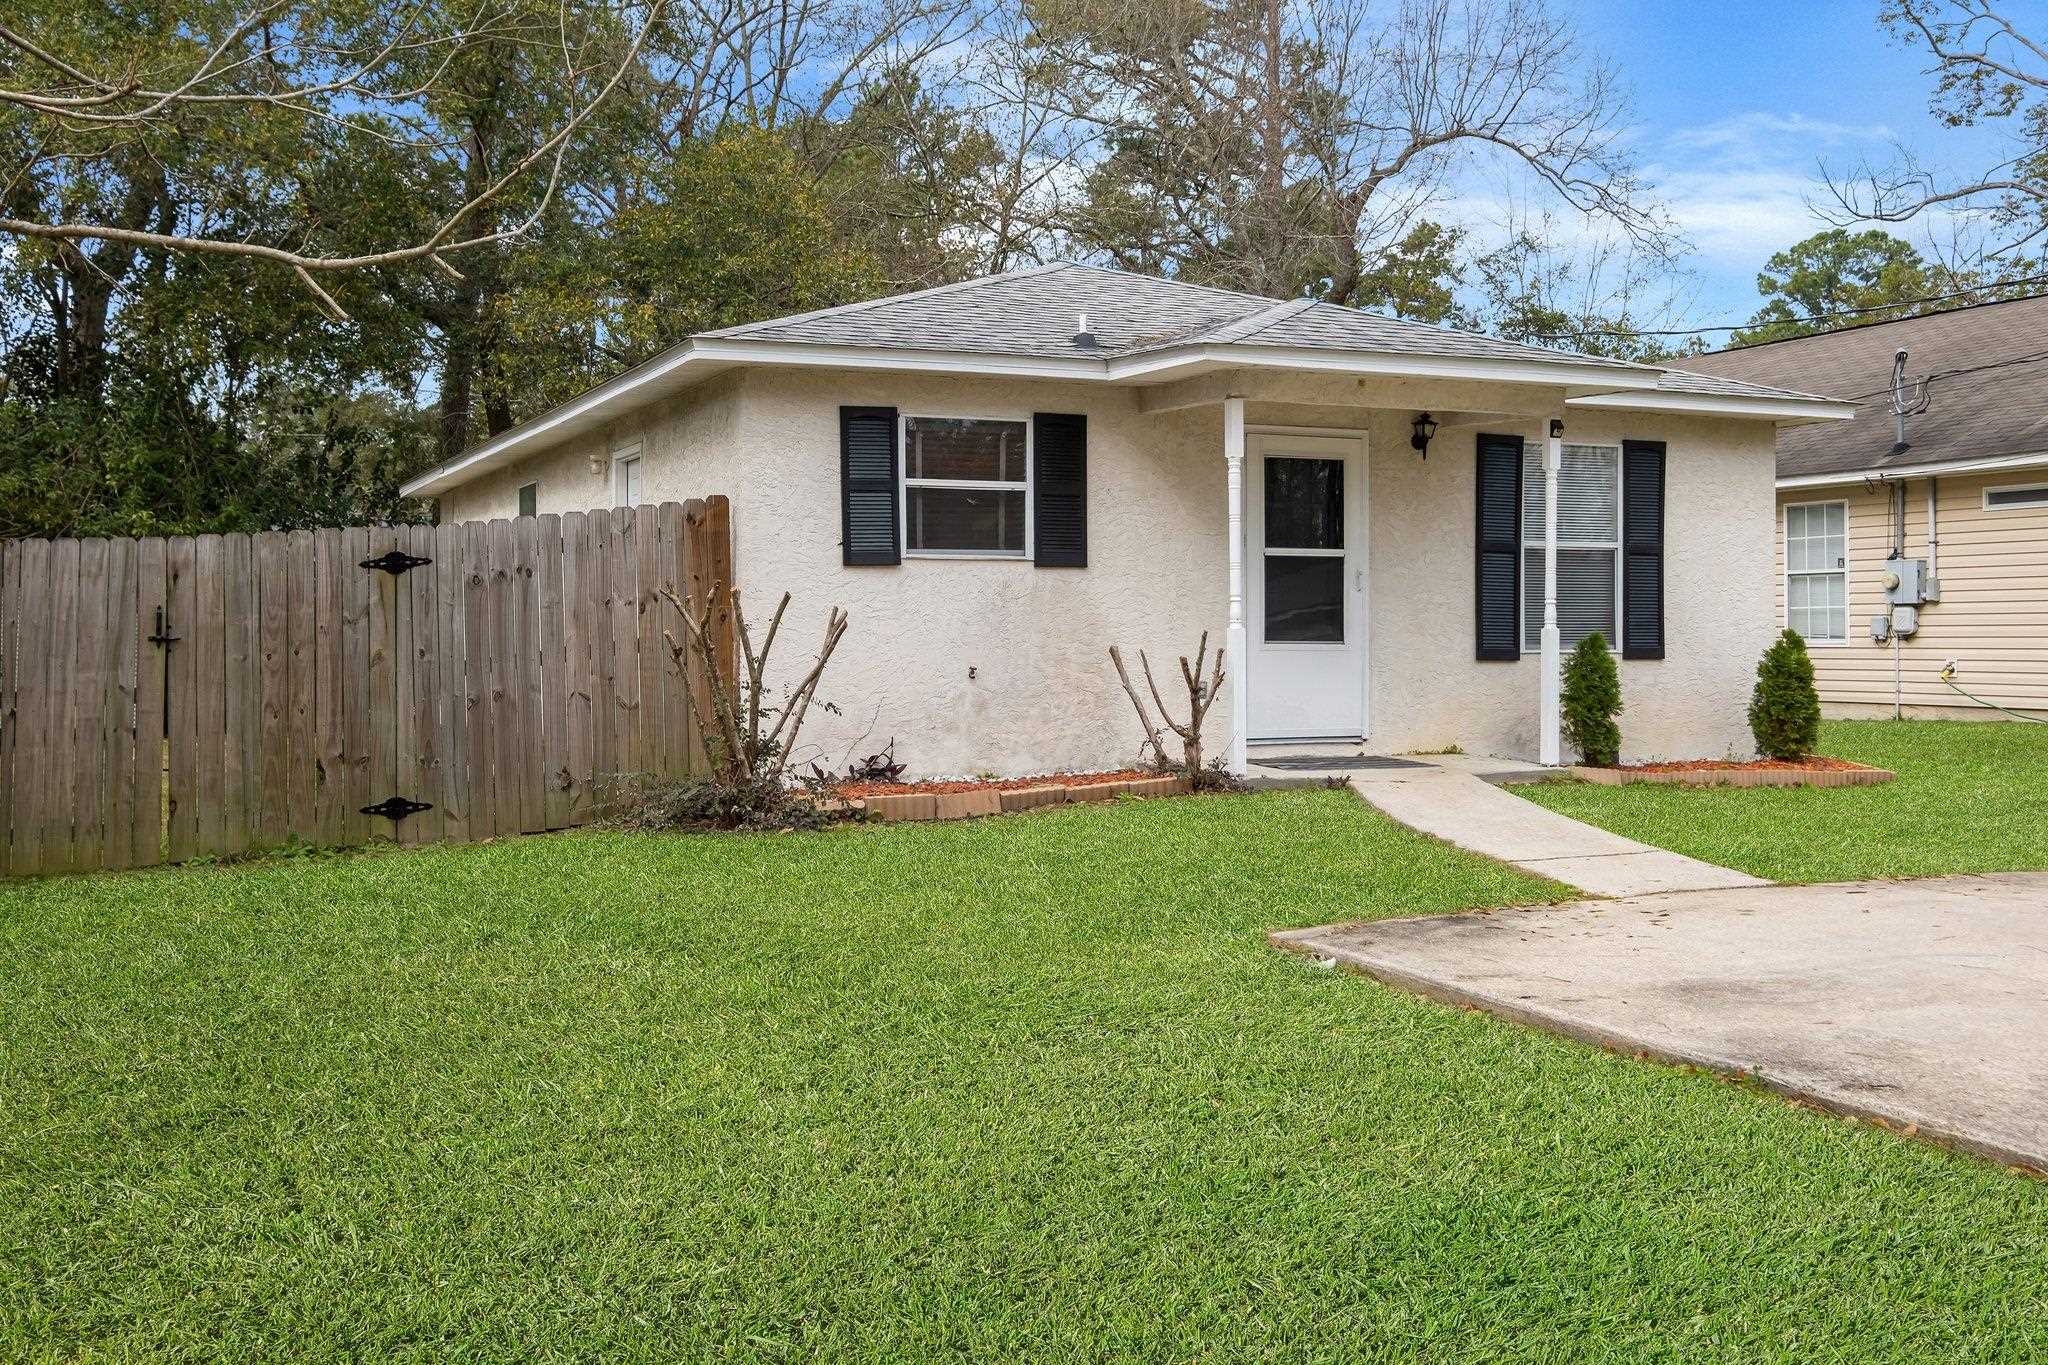 1430 Connecticut St,TALLAHASSEE,Florida 32304,3 Bedrooms Bedrooms,2 BathroomsBathrooms,Detached single family,1430 Connecticut St,368684